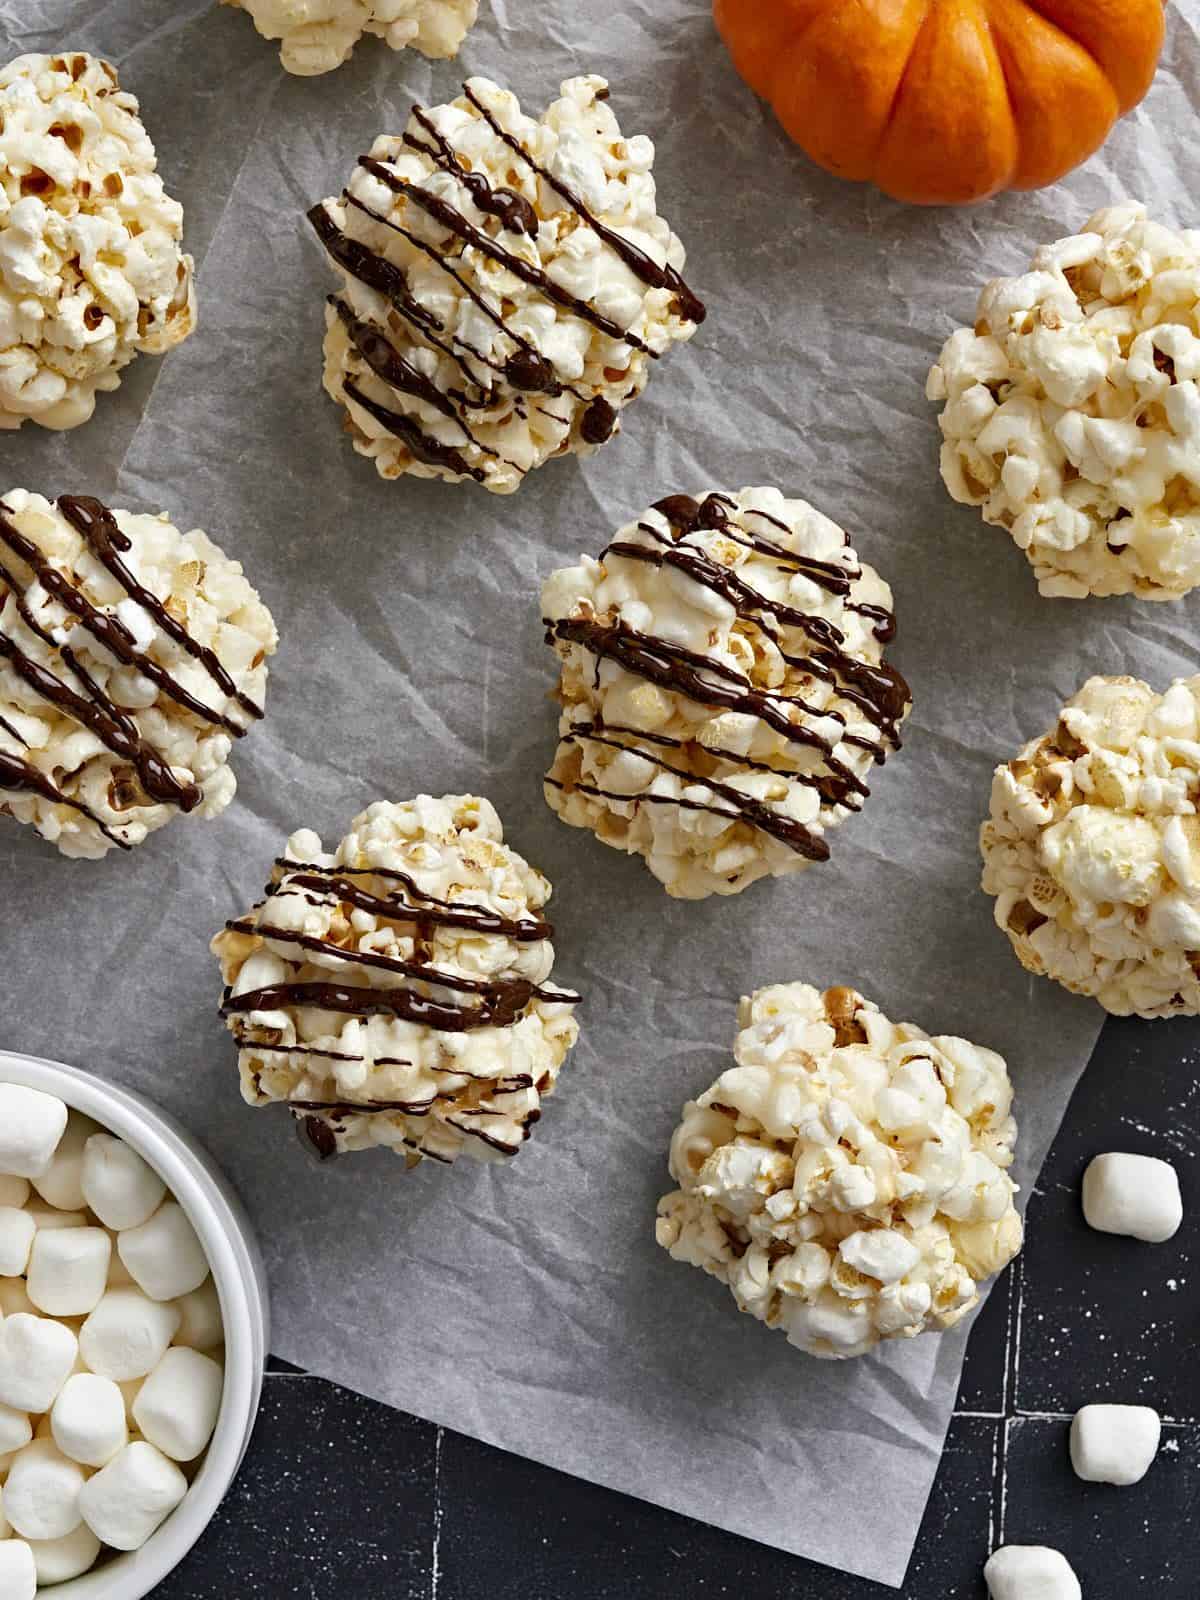 Overhead view of popcorn balls spread out on parchment paper with chocolate drizzled over 4 popcorn balls.